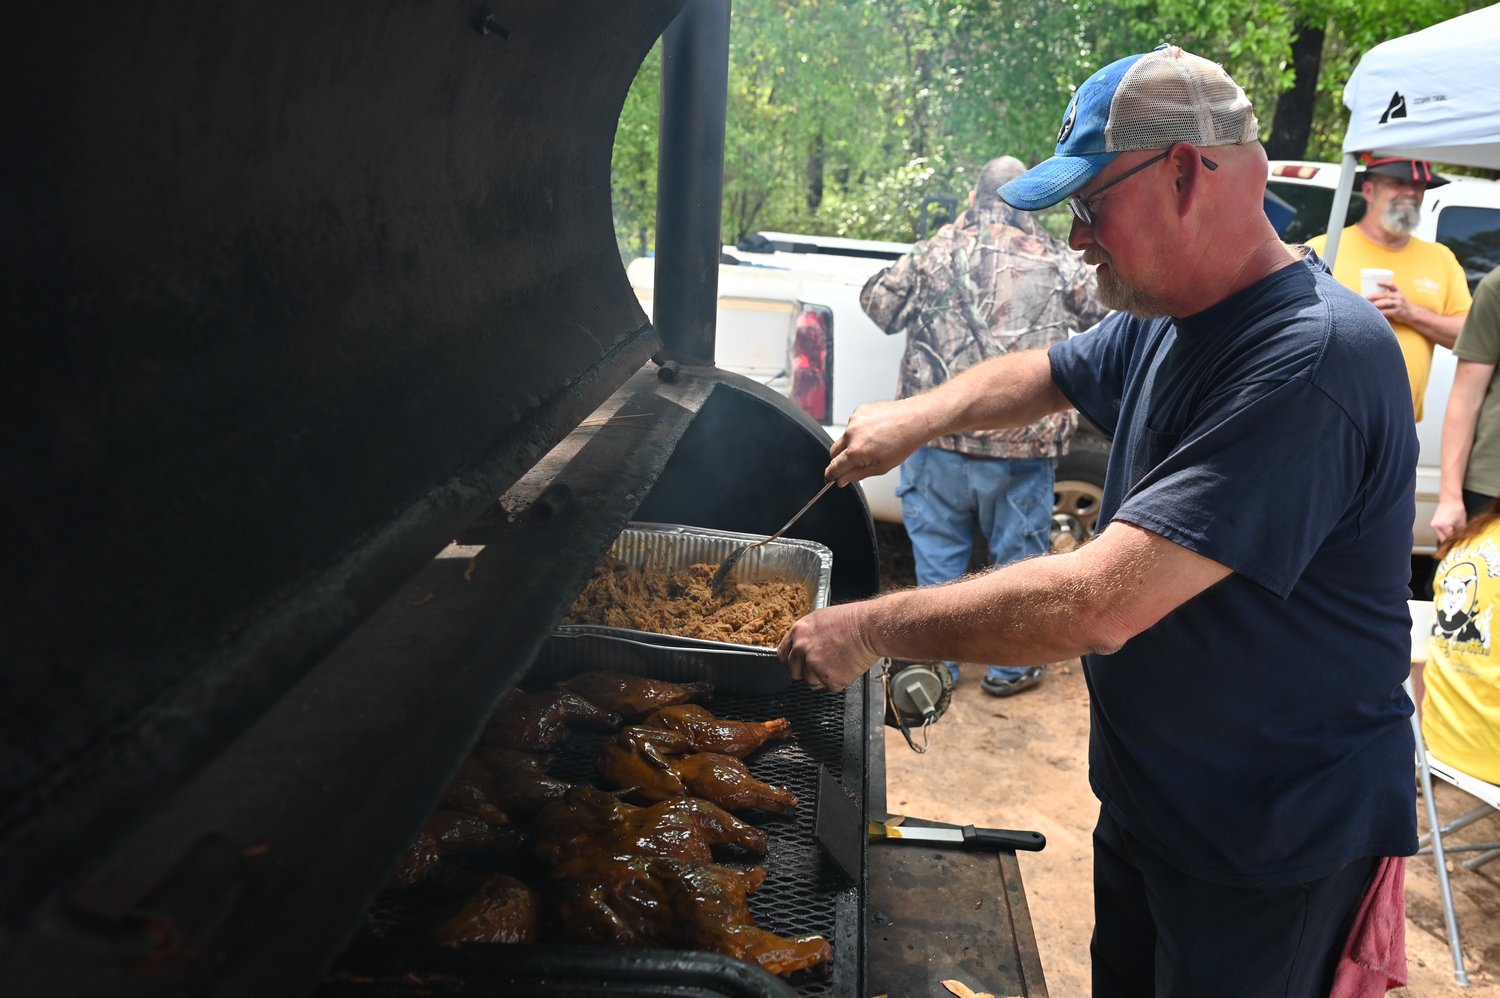 New Bethel Baptist Church Pastor Danny Craft prepares chicken for the Christian barbecue competition in Preston, Ga. on Saturday, April 1, 2023. (Index/Roger Alford)